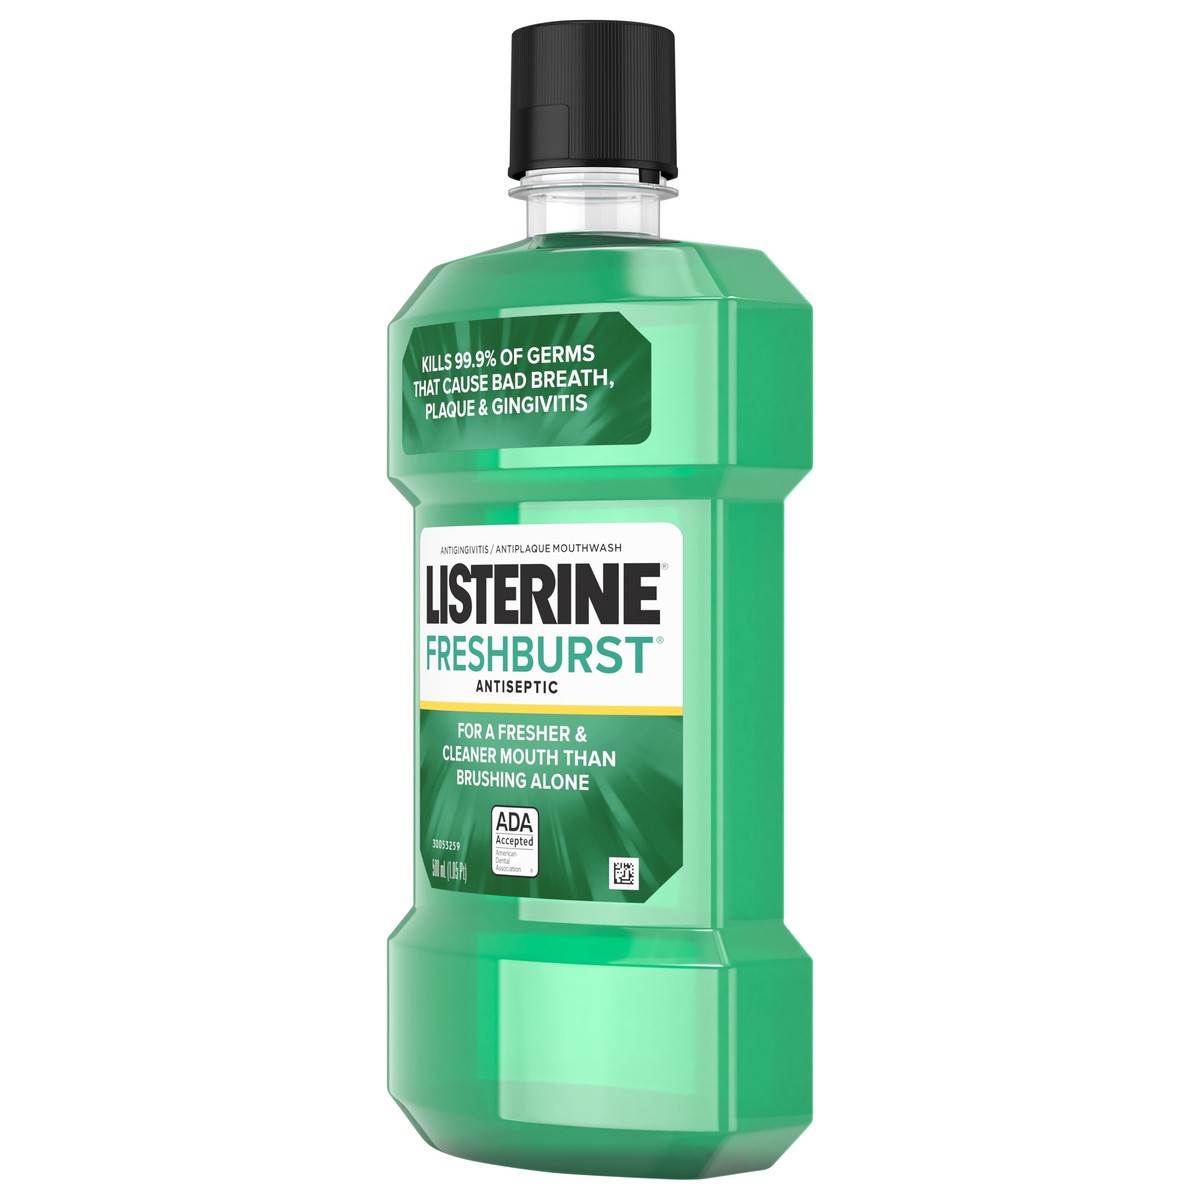 slide 11 of 12, Listerine Freshburst Antiseptic Mouthwash for Bad Breath, Kills 99% of Germs that Cause Bad Breath & Fight Plaque & Gingivitis, ADA Accepted Mouthwash, Spearmint, 500 mL, 500 ml